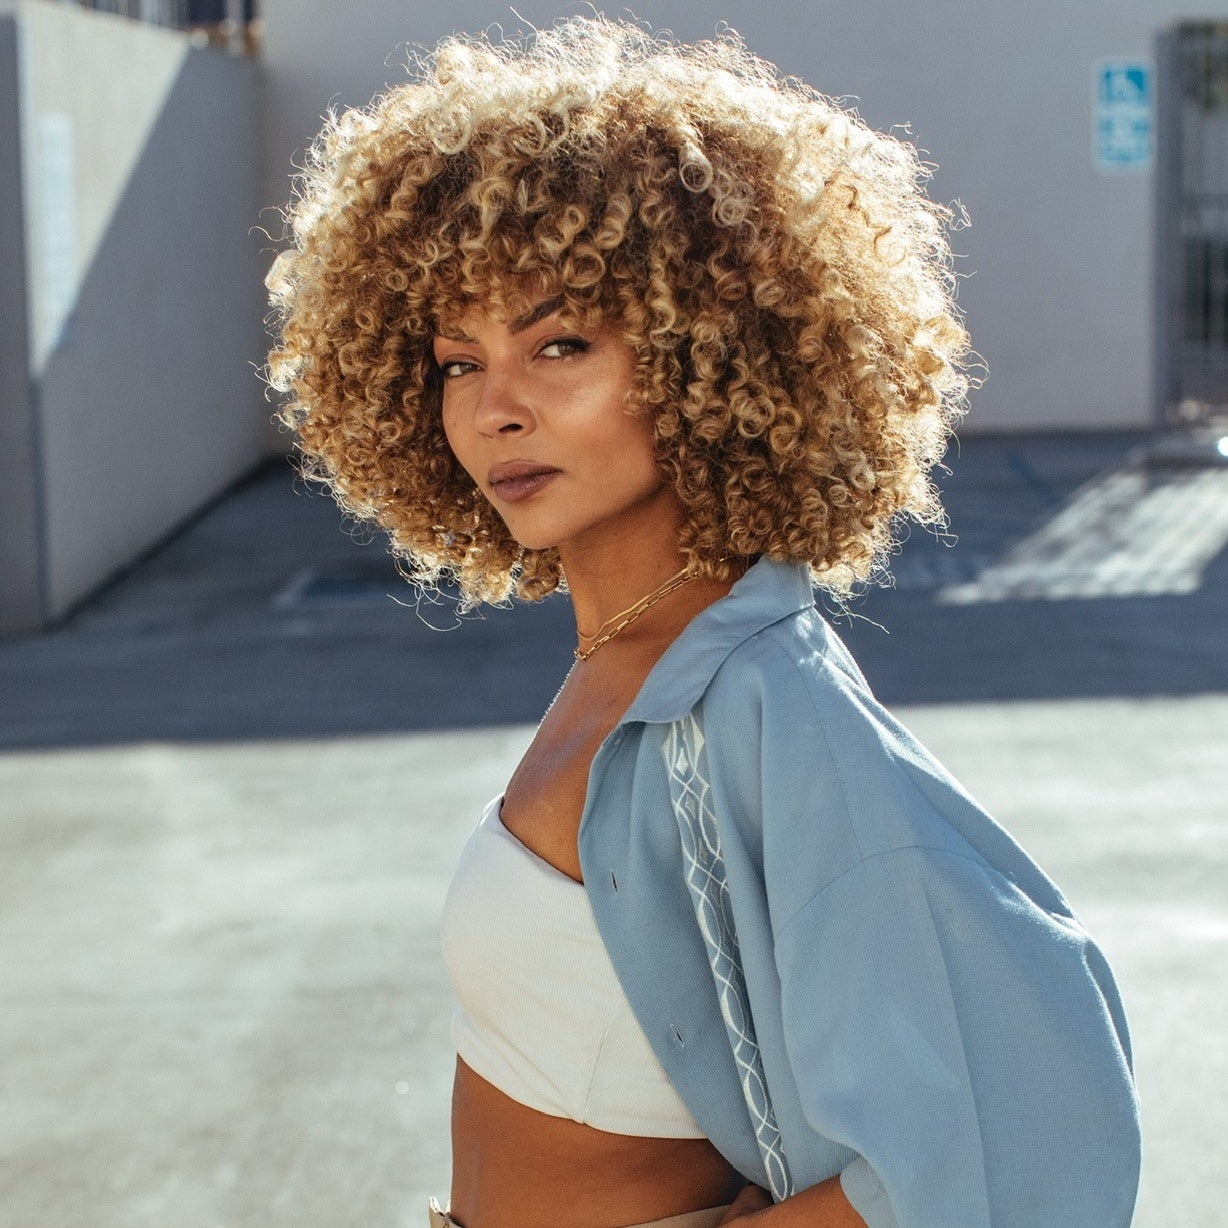 Dancer Ashley Everett Launches New Wellness Brand To Help Us Be 'Greater Than'